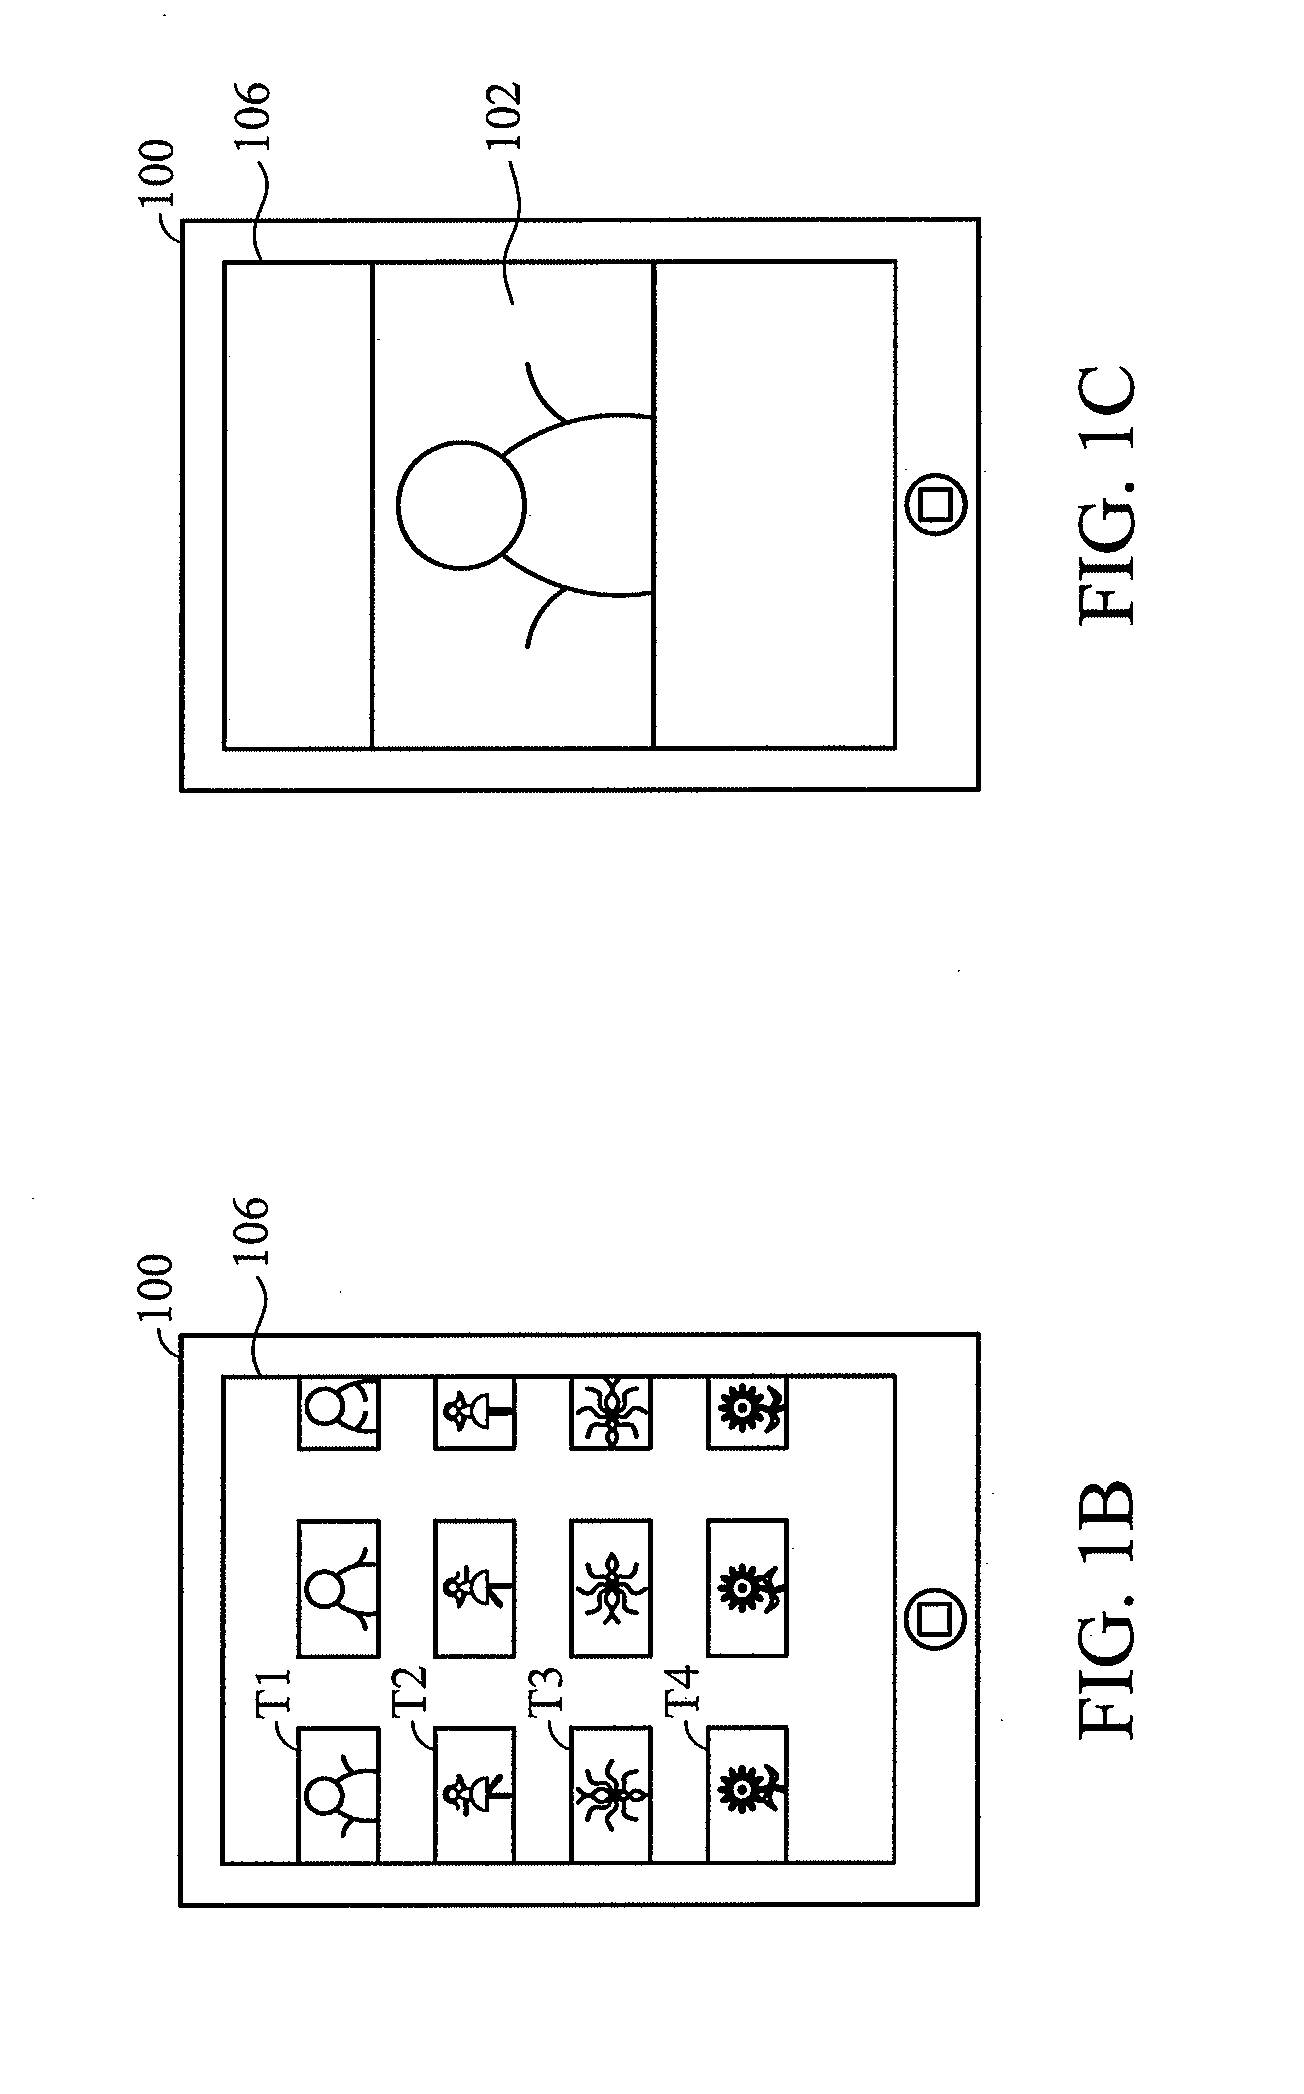 Constant speed display method of mobile device